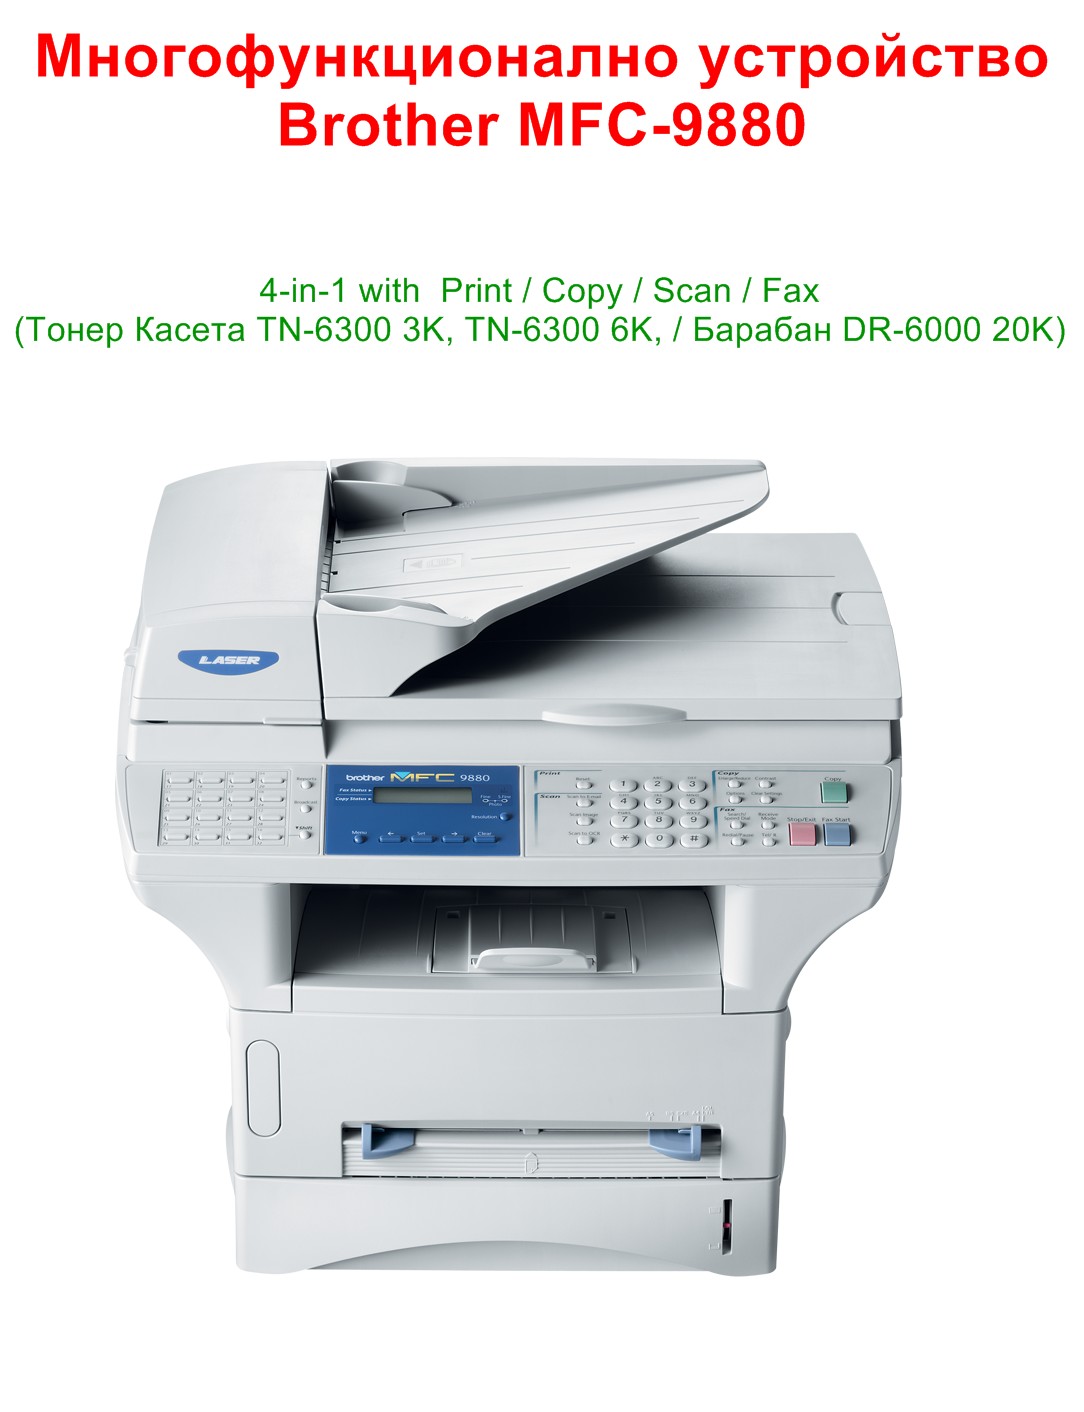 All-in-One Printer Brother MFC-9880